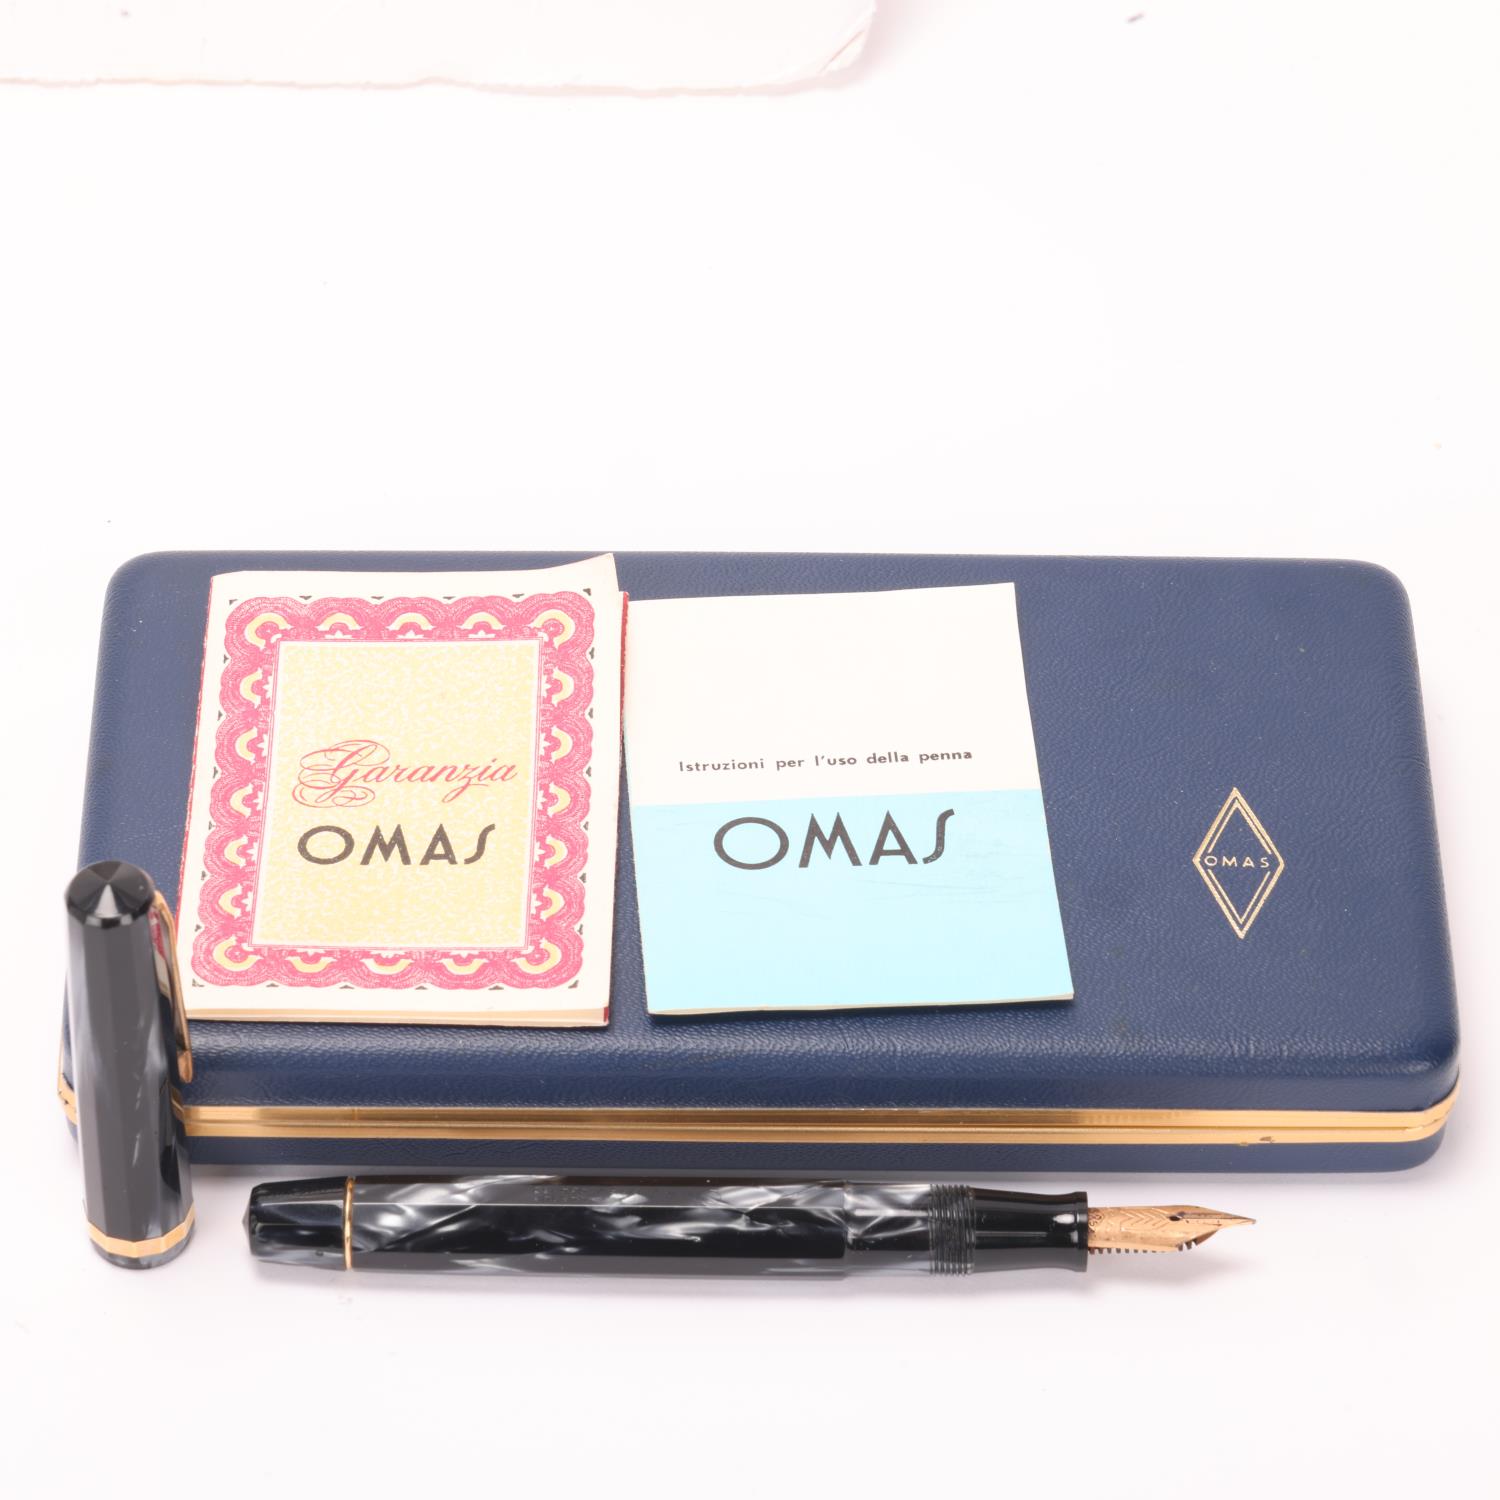 An Omas Dama fountain pen, with 14ct nib and black marbled resin, marked "EXTRA 445846 - Bild 4 aus 4